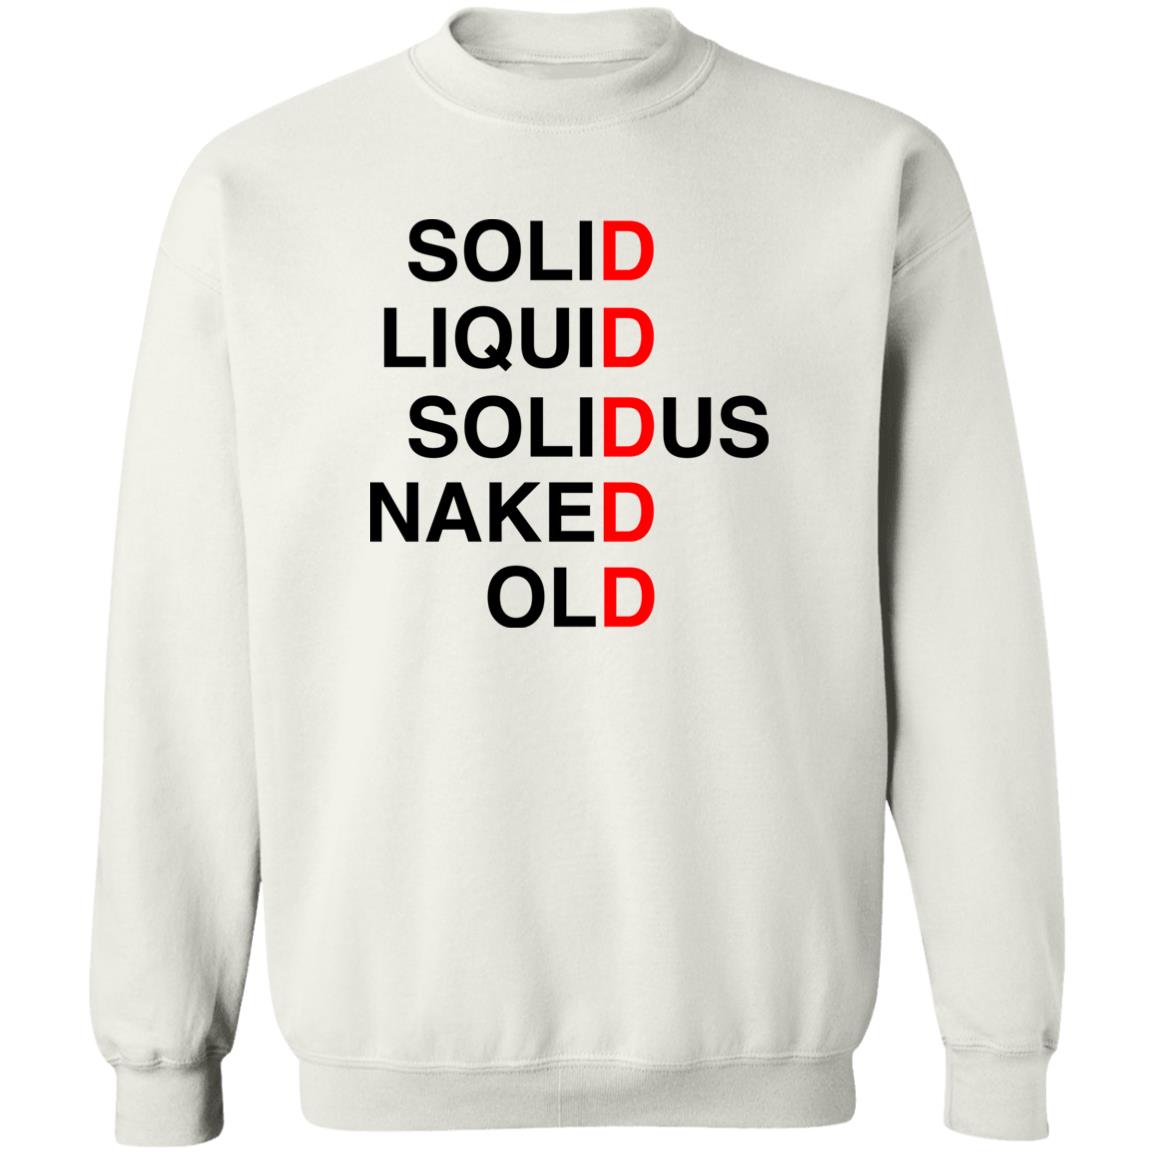 Solid Liquid Solidus Naked Old Shirt 1